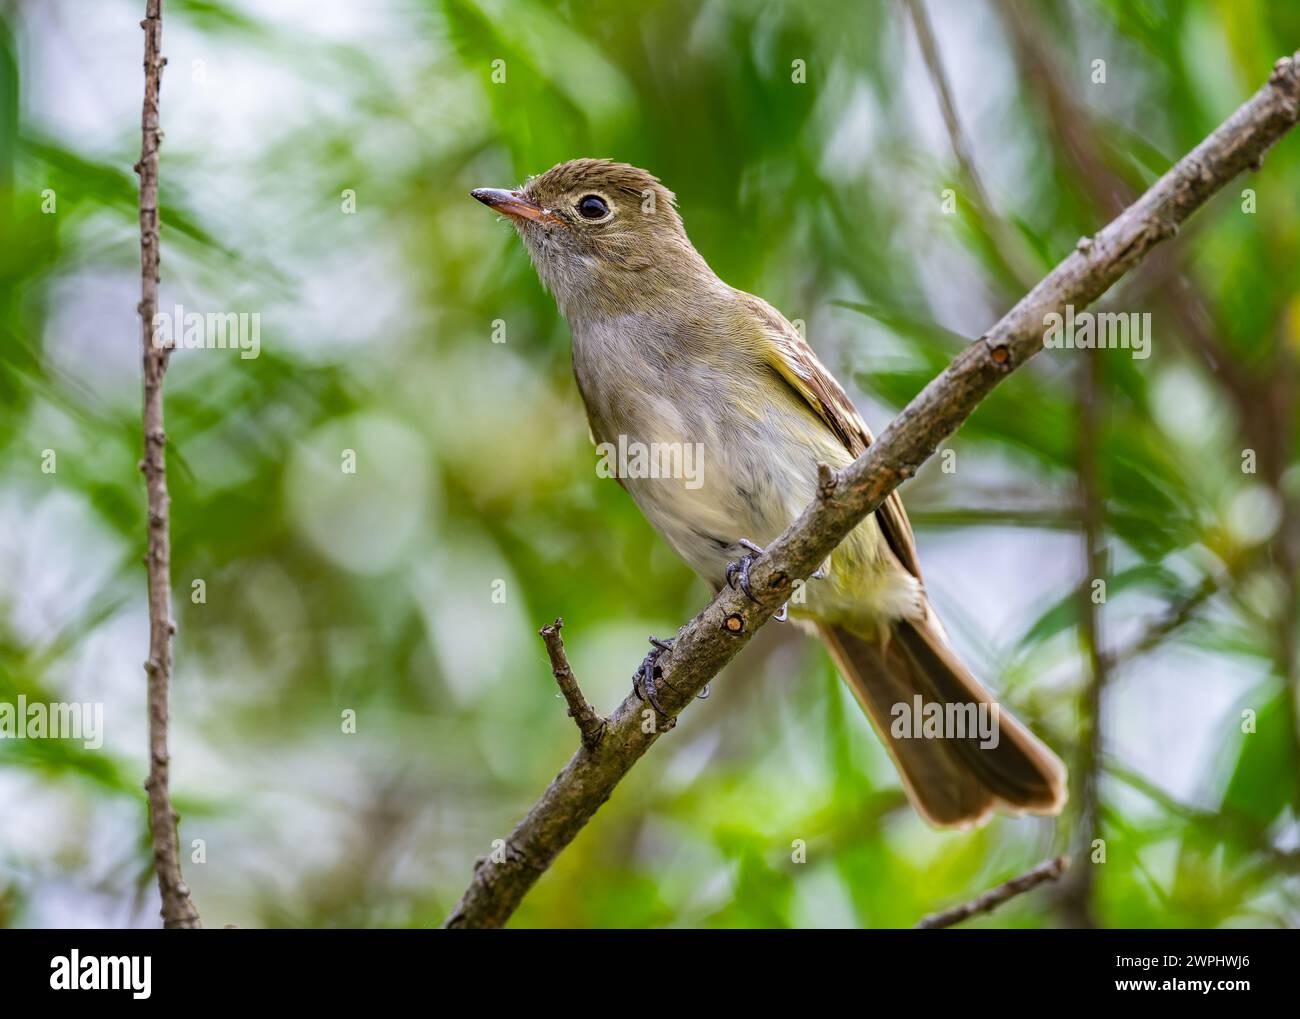 A Small-billed Elaenia (Elaenia parvirostris) perched on a branch. Argentina. Stock Photo